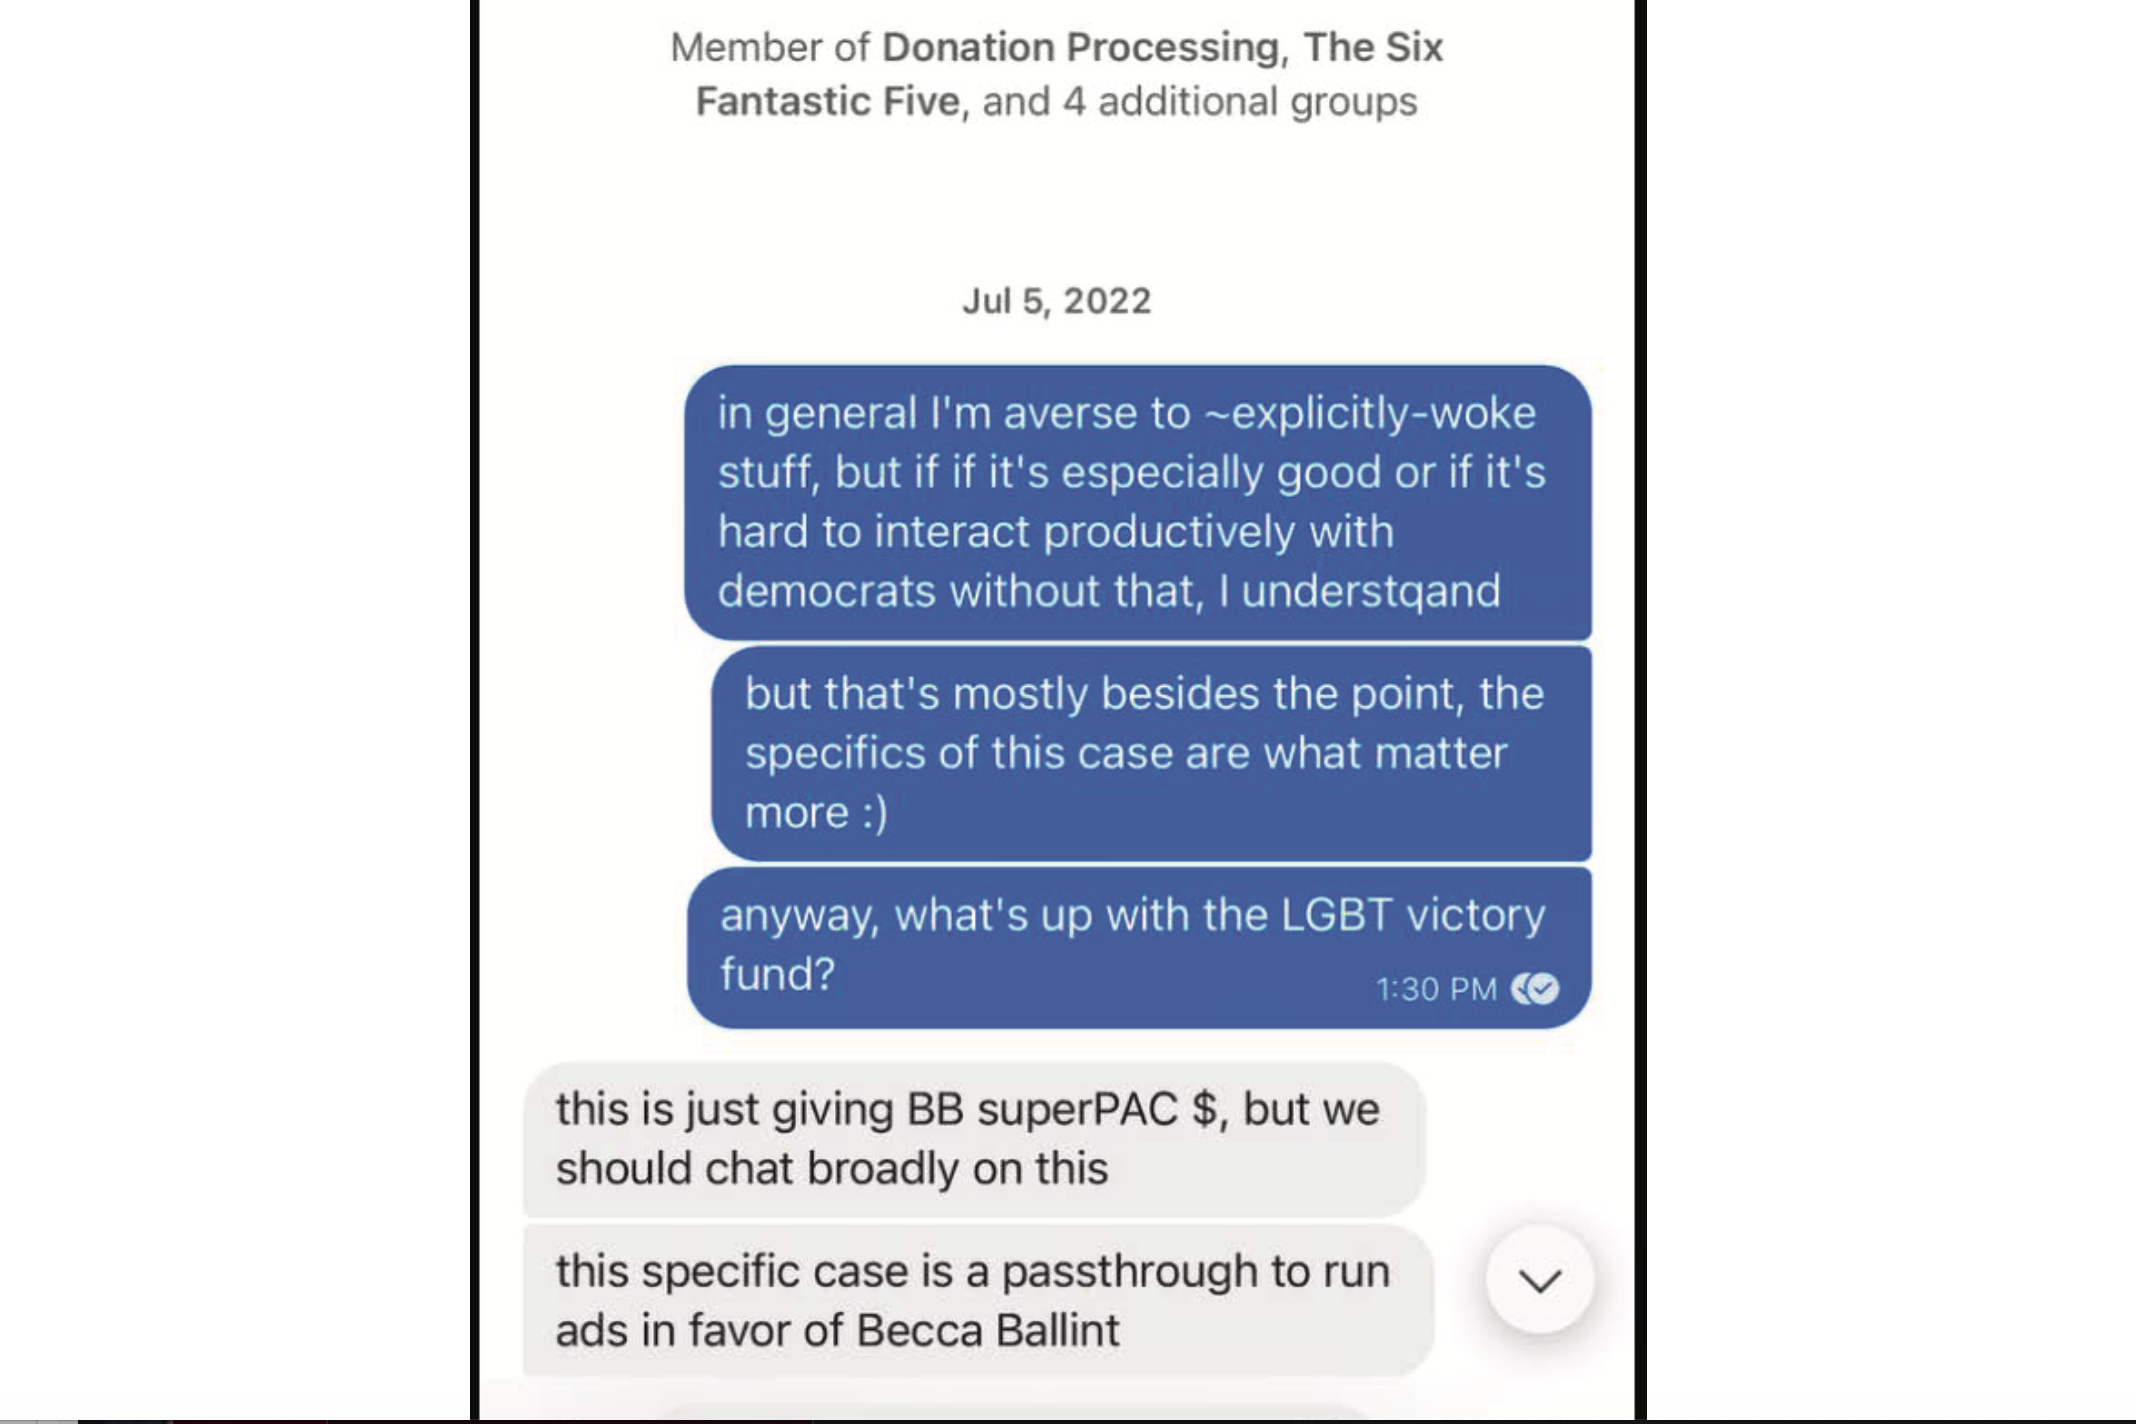 An July 5, 2022, exchange of messages on a Signal chat reading in part: "what's up with the LGBT victory fund?" "this is just giving BB superPAC $, but we should chat broadly on this. this specific case is a passthrough to run ads in favor of Becca Balint."